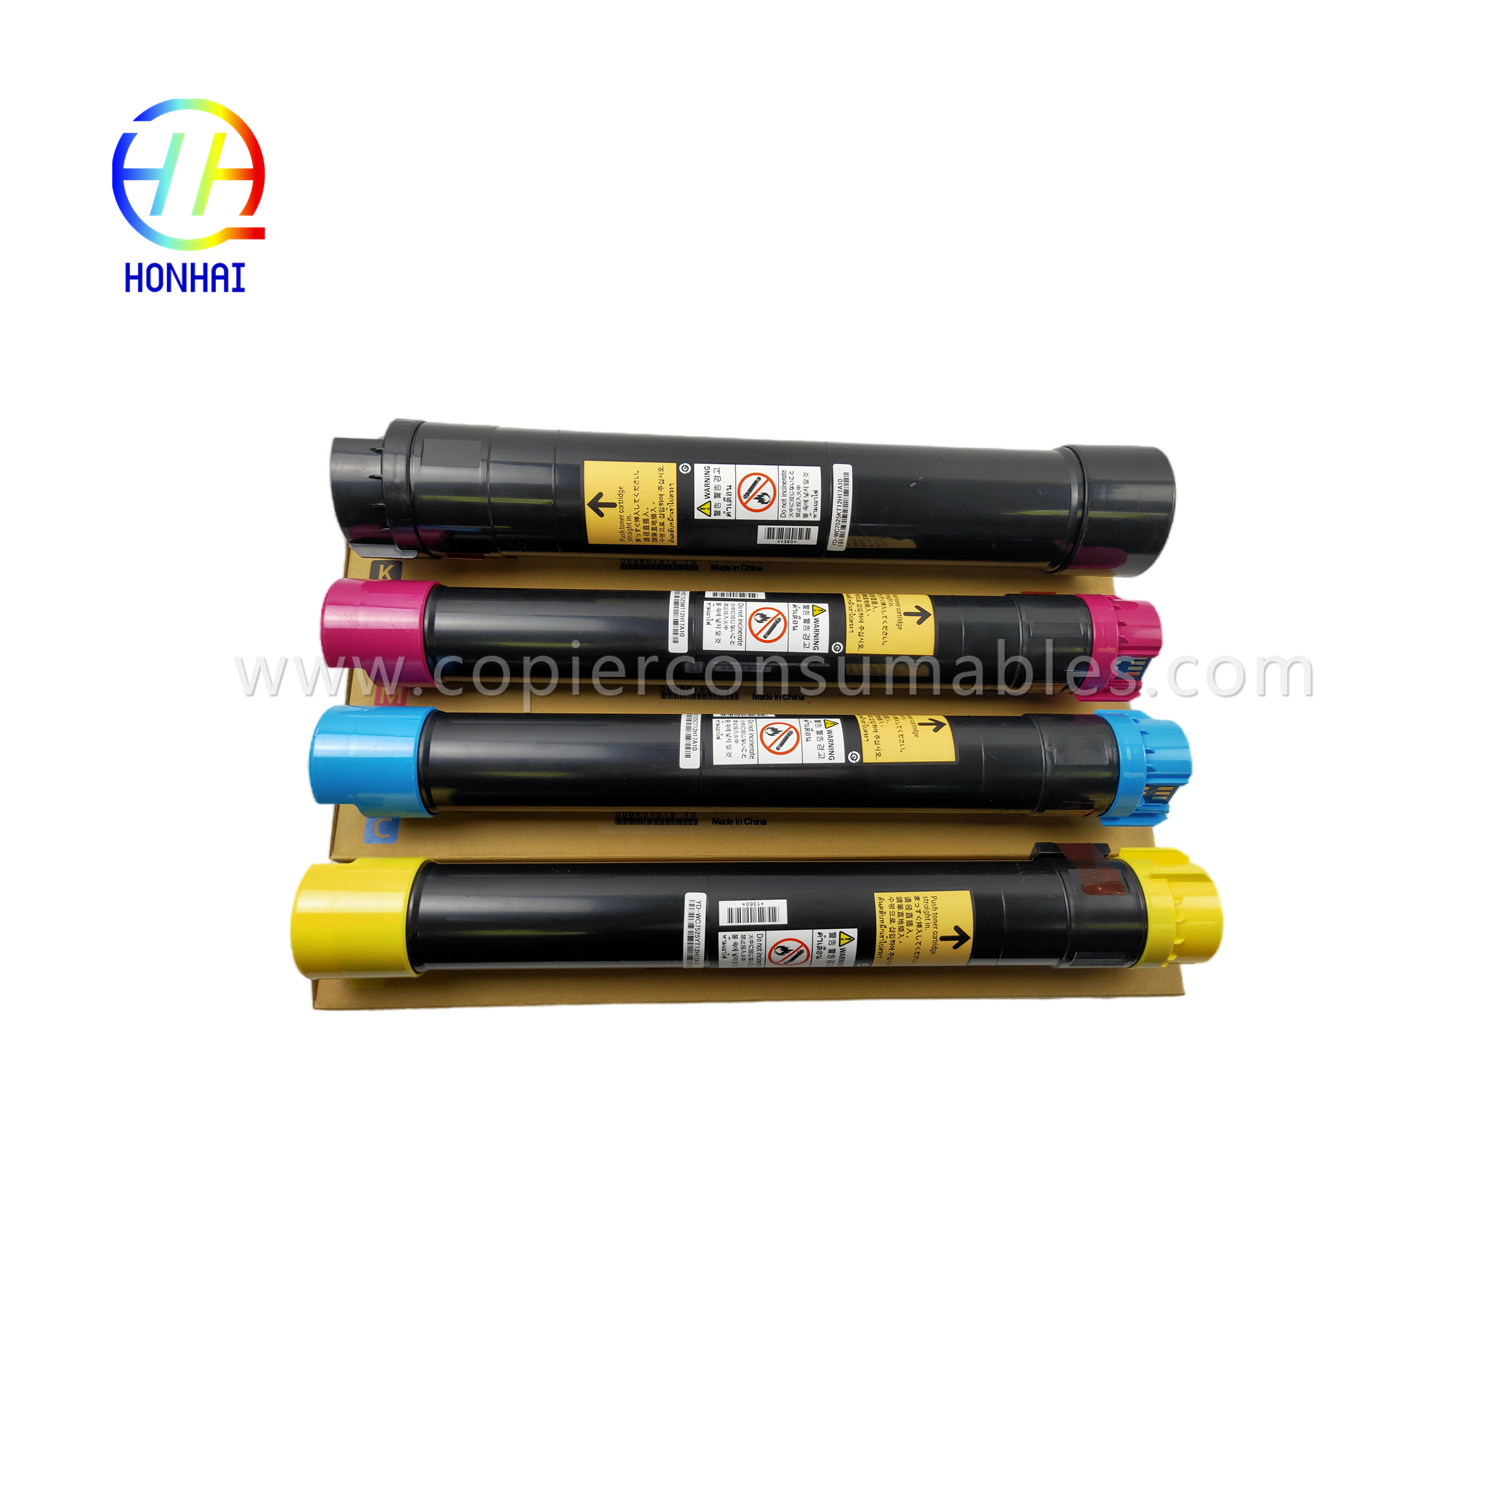 https://c585.goodao.net/toner-cartridge-imported-powder-set-bcmy-for-xerox-workcentre-7830-7835-7845-7855-7970-7525-7530-7535-7545-7506-5106-r 006r01514-006r01515-006r01516-produkt/